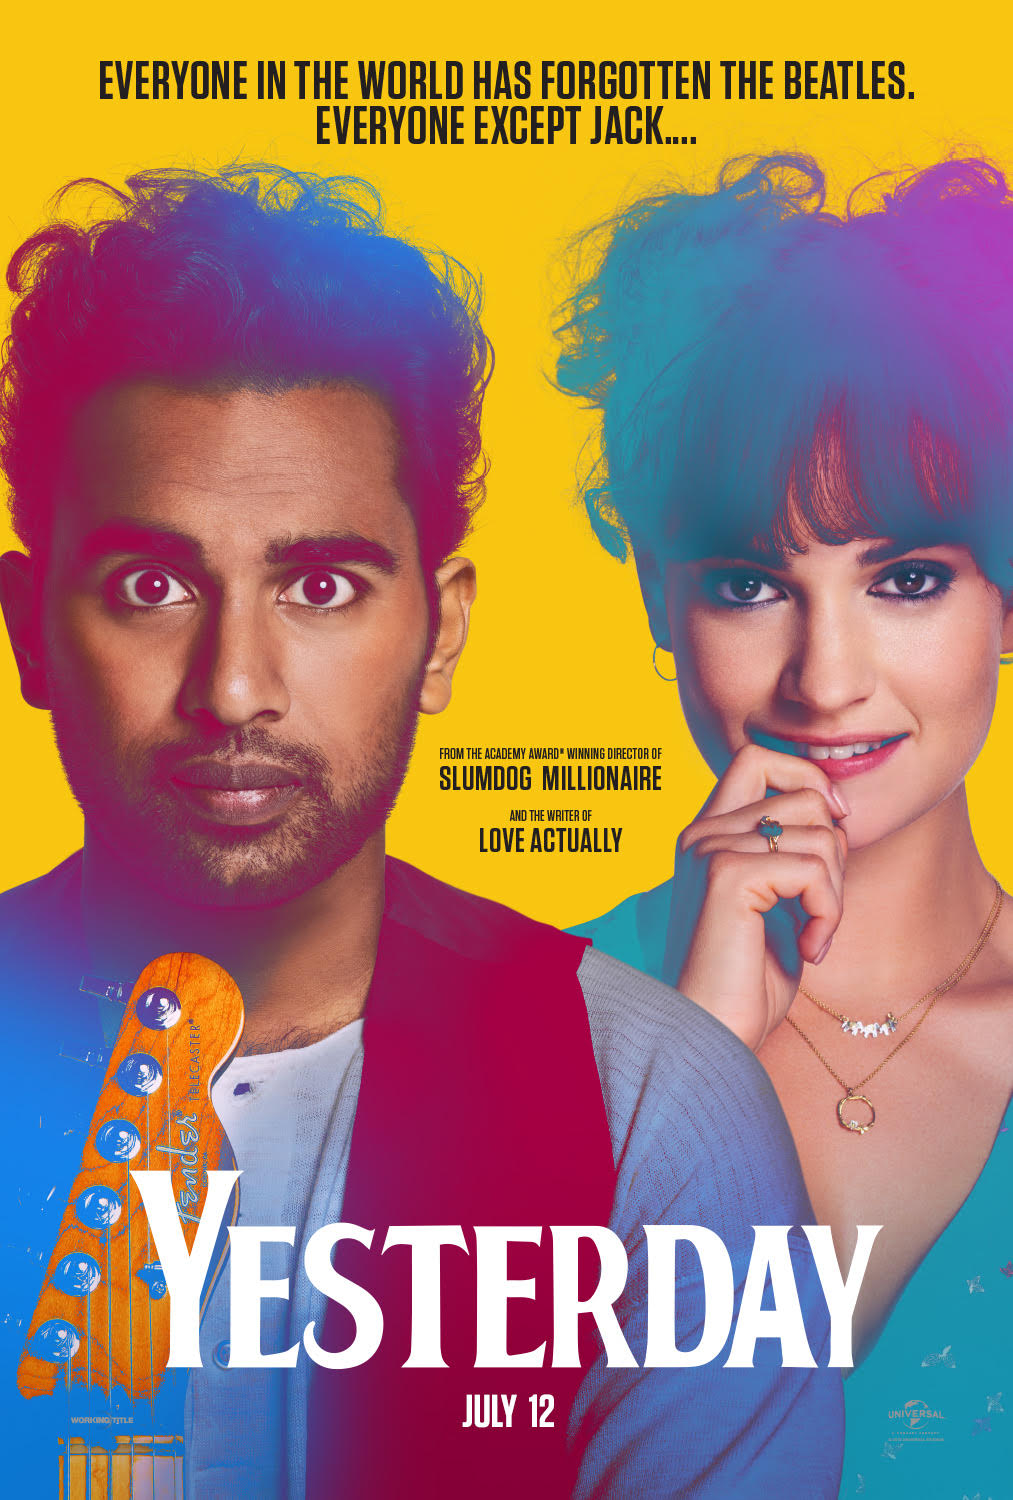 Yesterday Review: Himesh Patel & Lily James concoct a pleasing love story with The Beatles' nostalgia